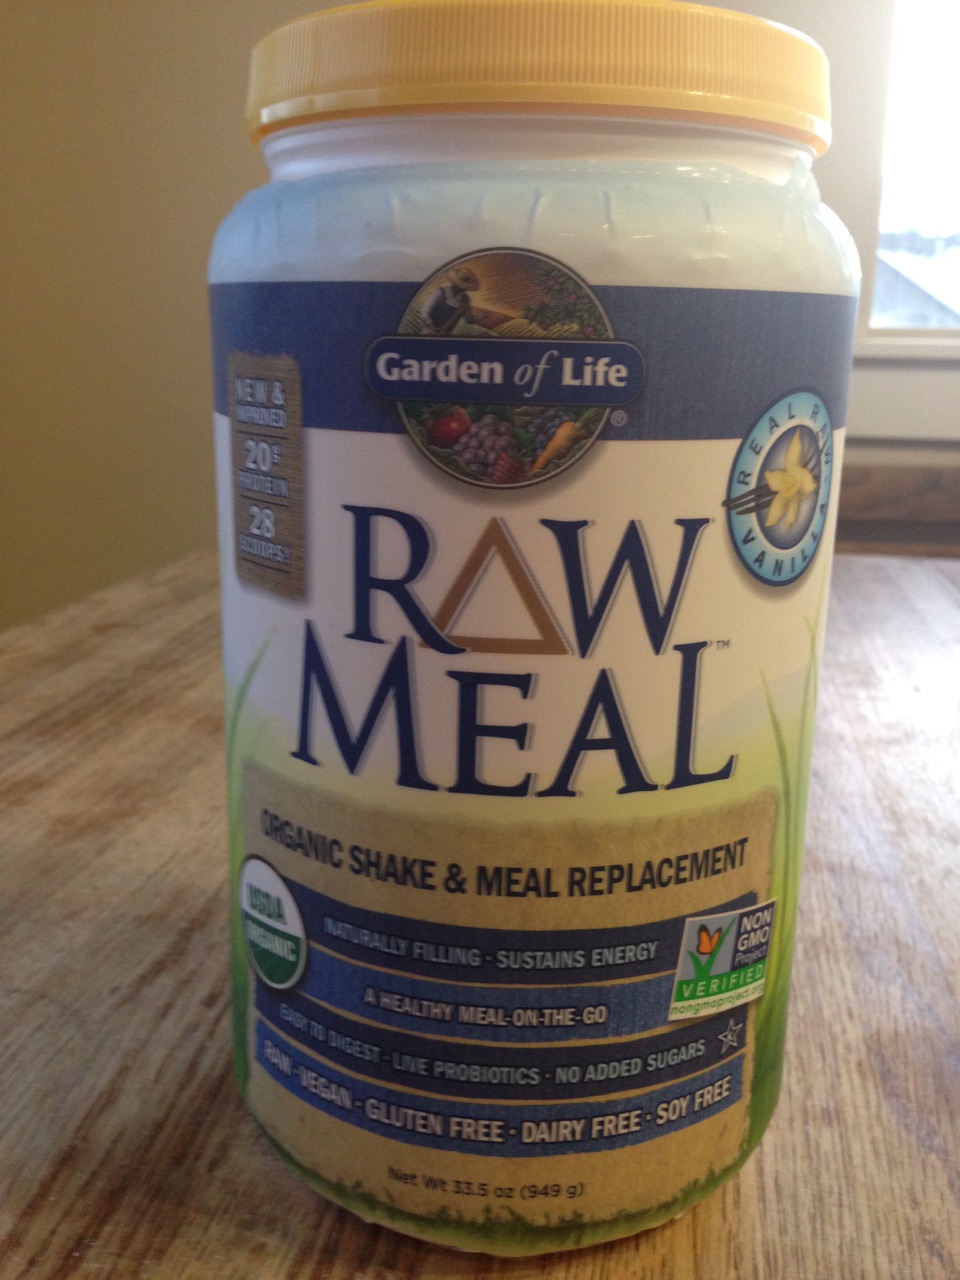 Garden of Life RAW Meal Organic Shake & Meal Product